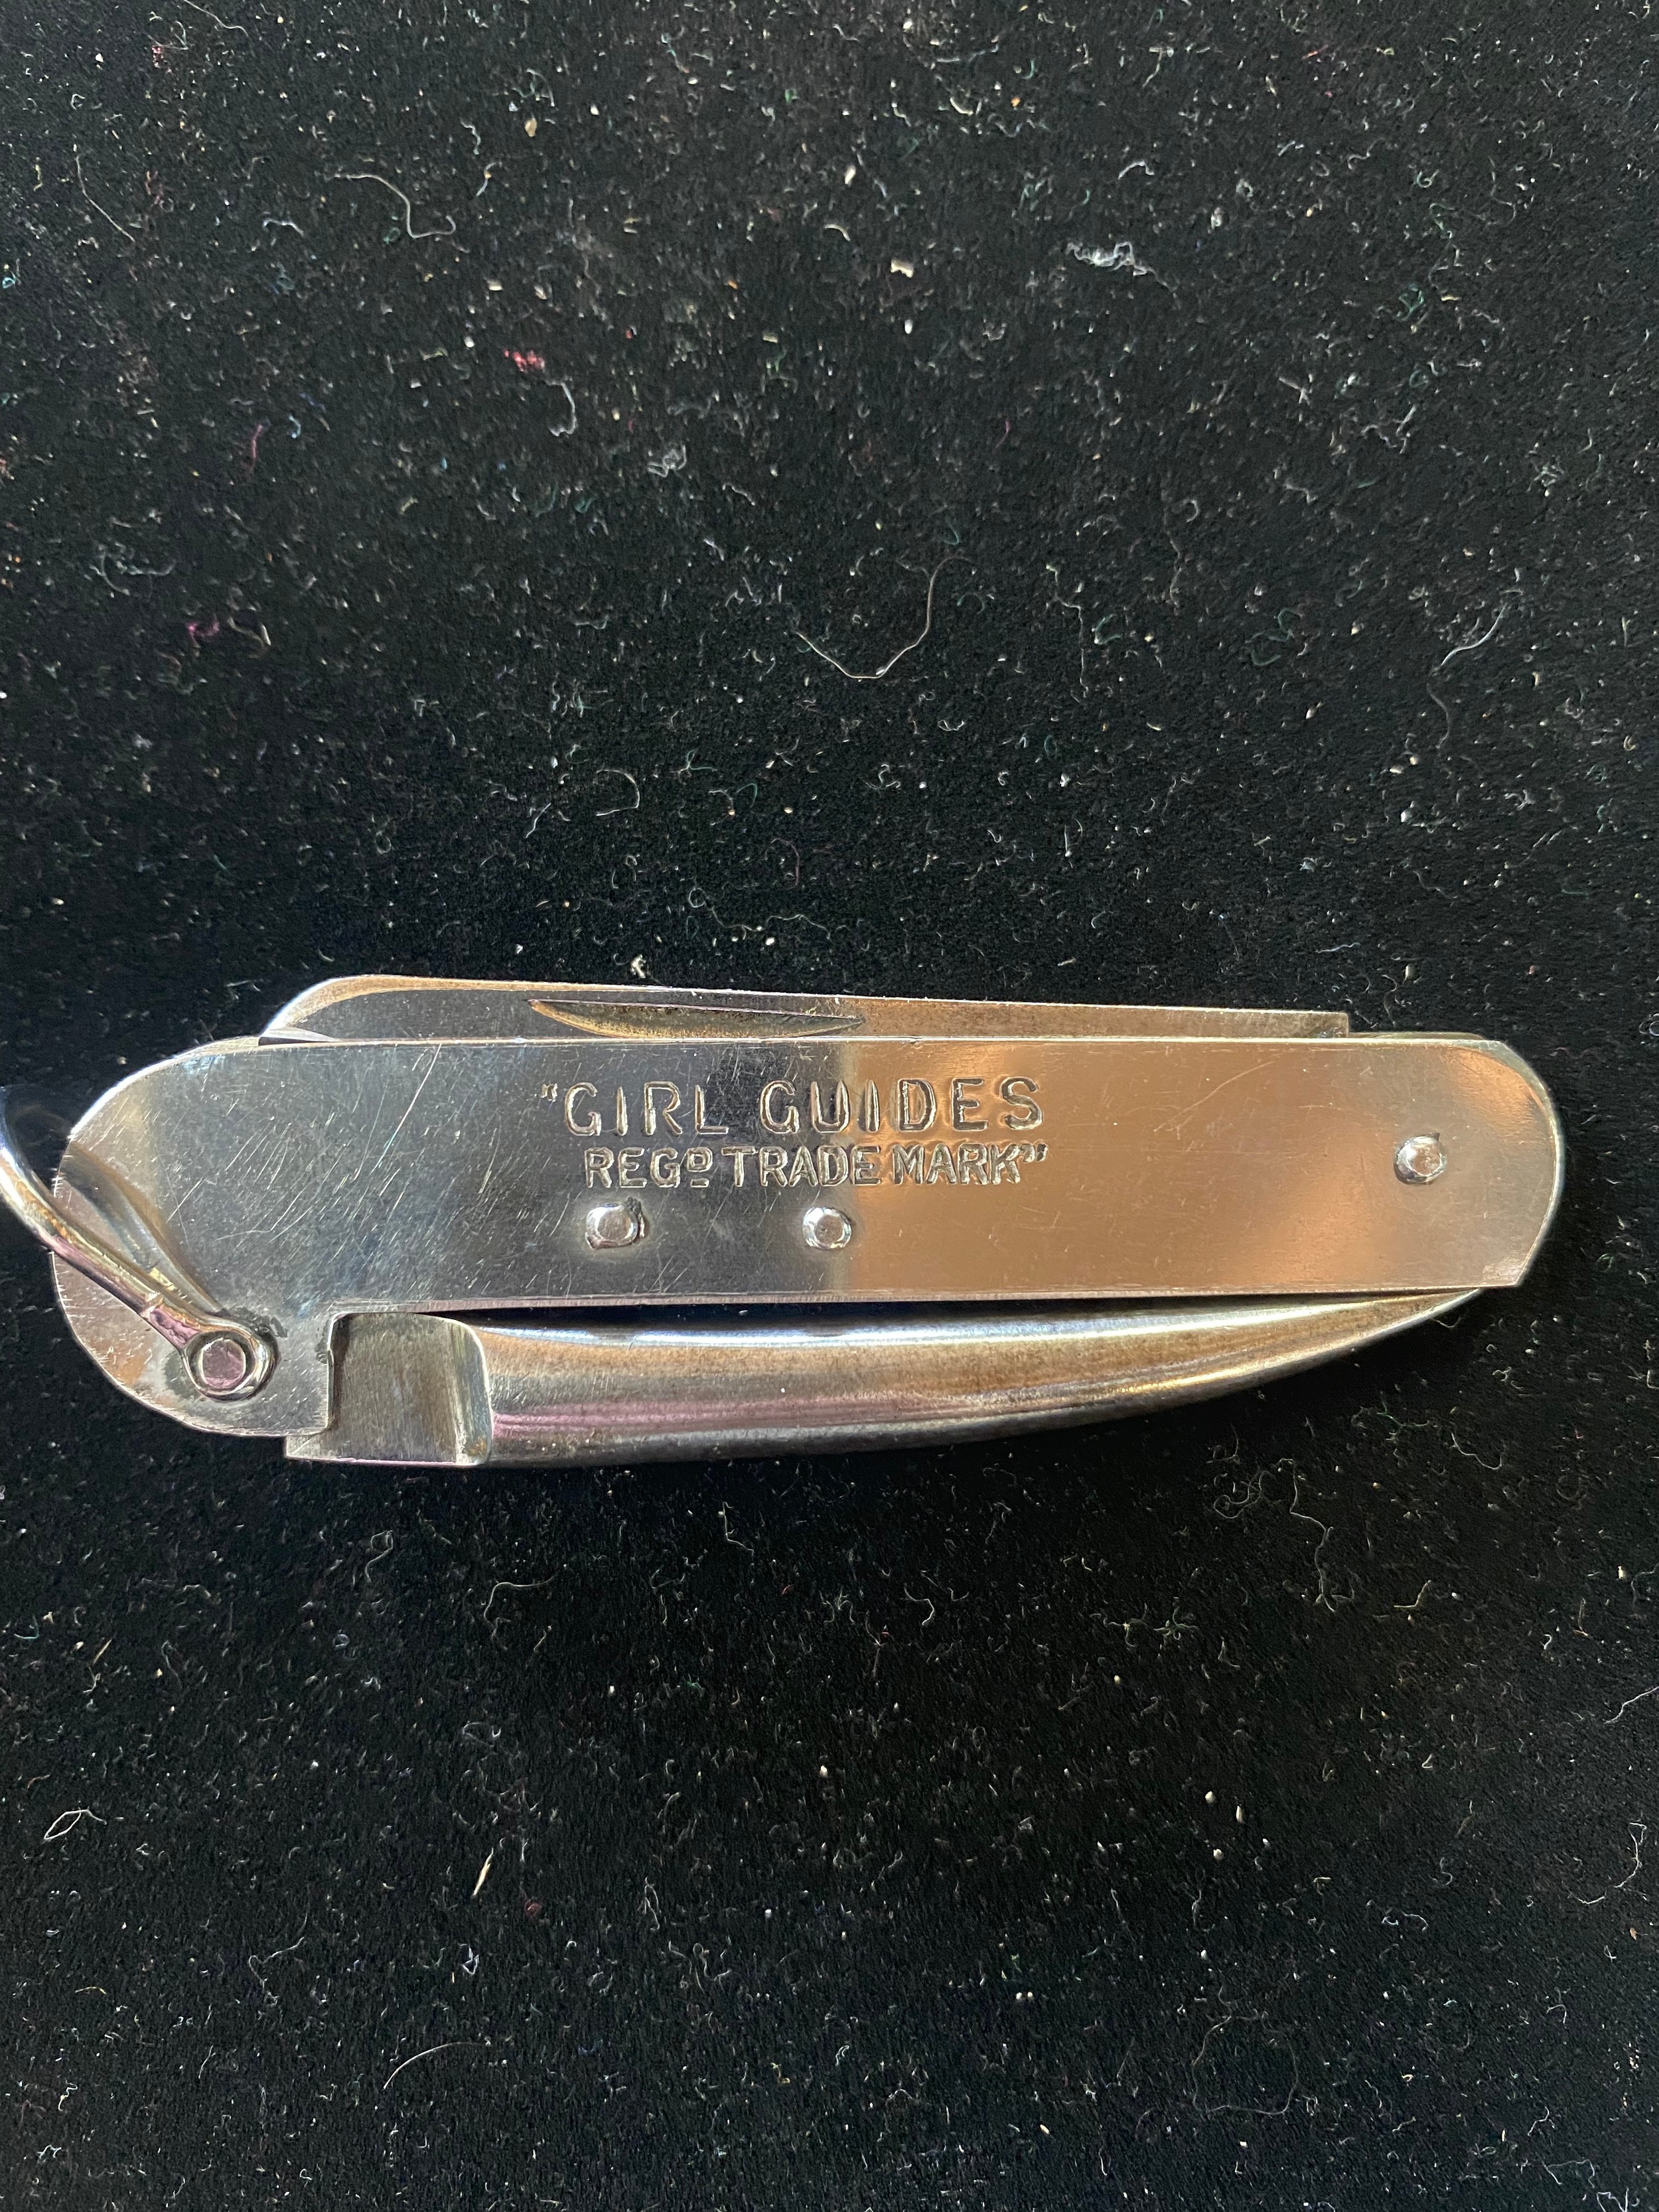 Girl Guides stainless steel pocket knife with single blade and marlin spike belt loop, blade